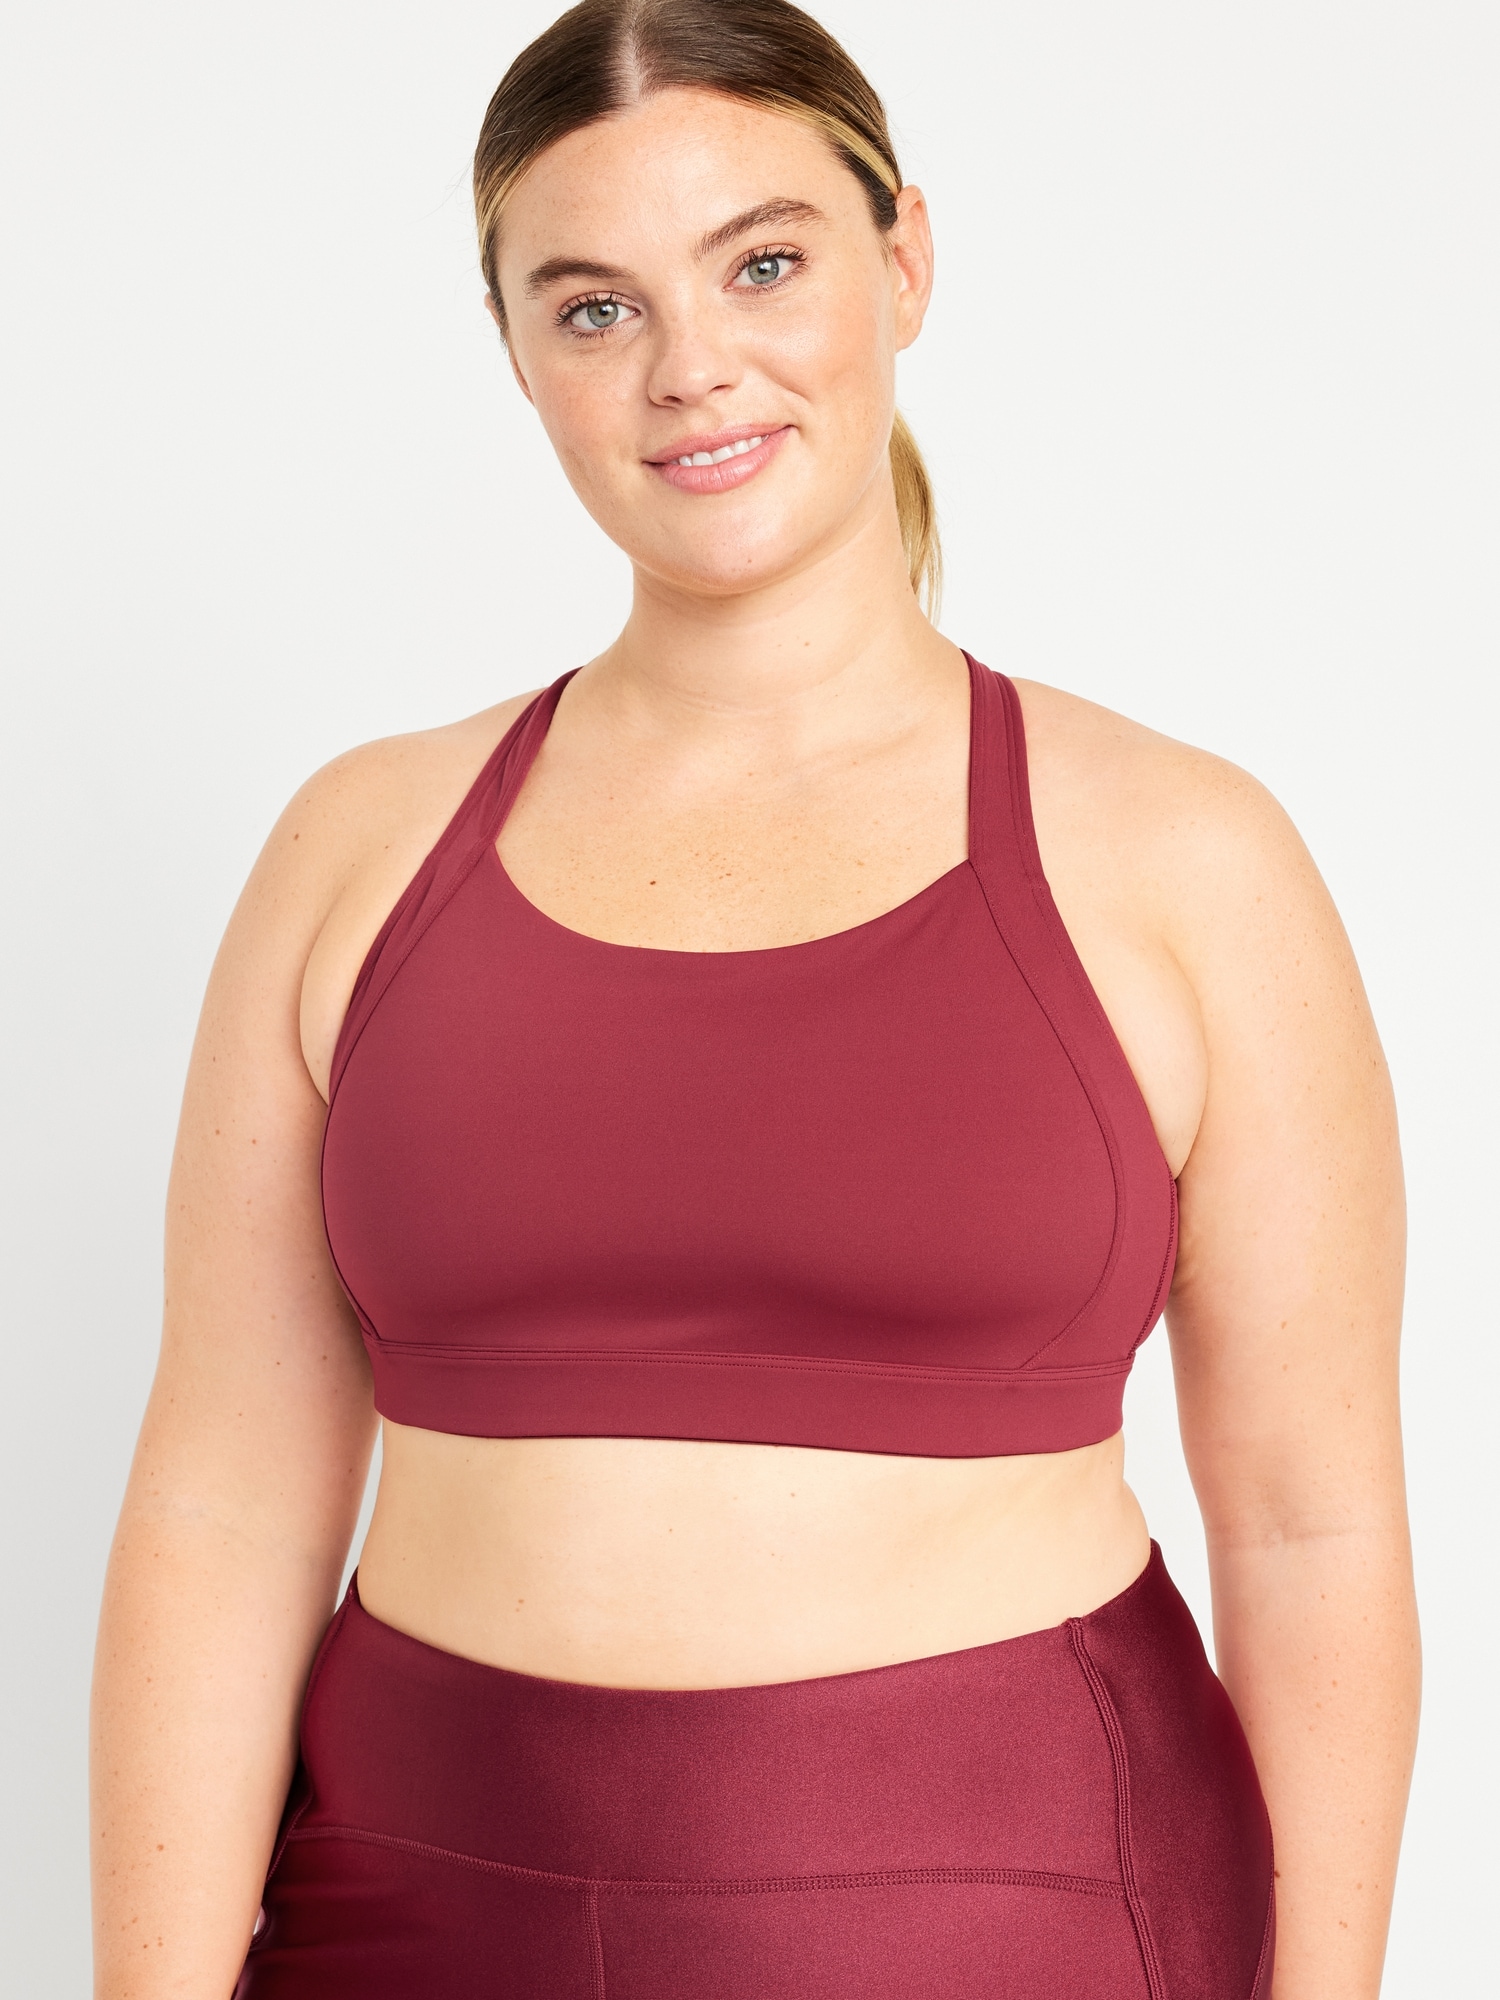 Buy Old Navy High Support PowerSoft Sports Bra For Women XS-XXL 2024 Online